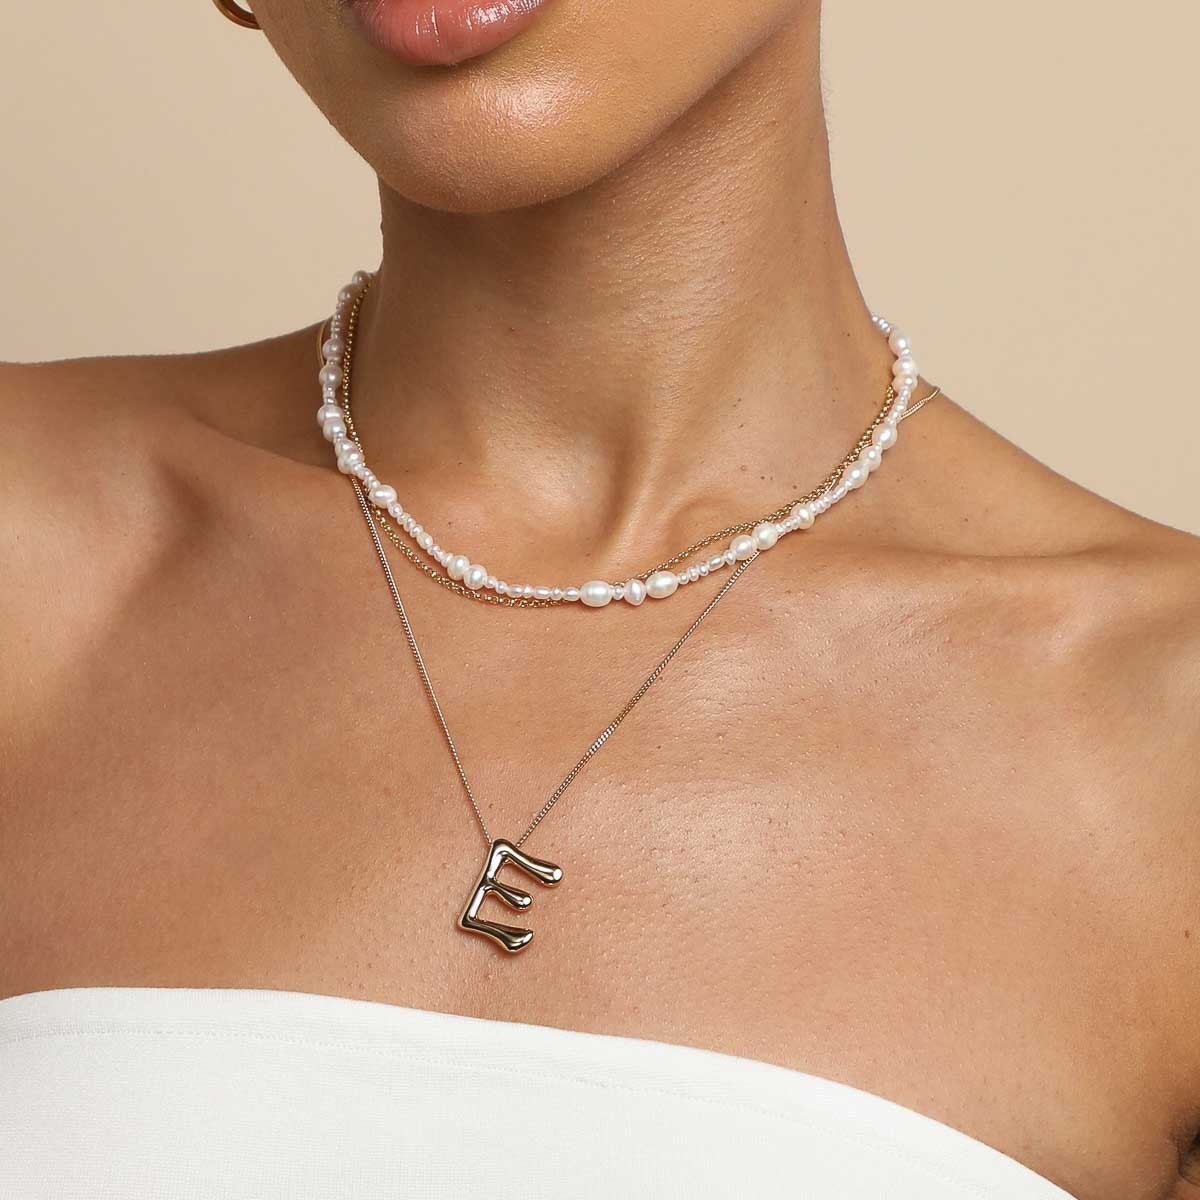 Personalized E Initial Cursive Necklace Set Tiny Letter E Monogram Pendant  Clavicle Dainty Jewelry For Memorial Gift From Ssteel, $27.13 | DHgate.Com